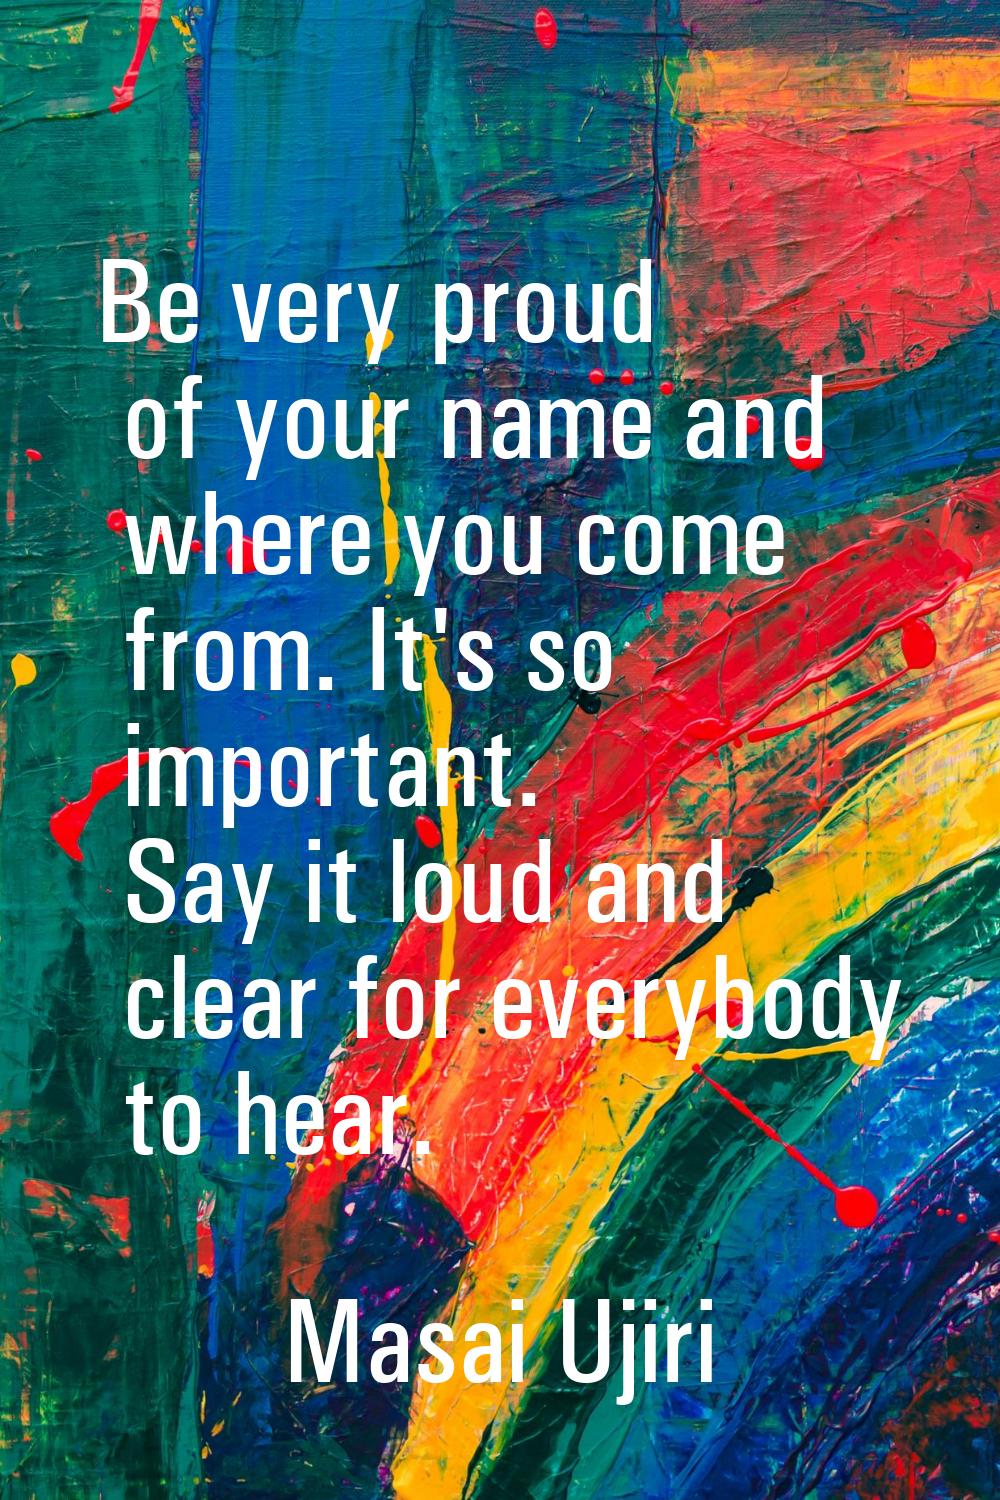 Be very proud of your name and where you come from. It's so important. Say it loud and clear for ev